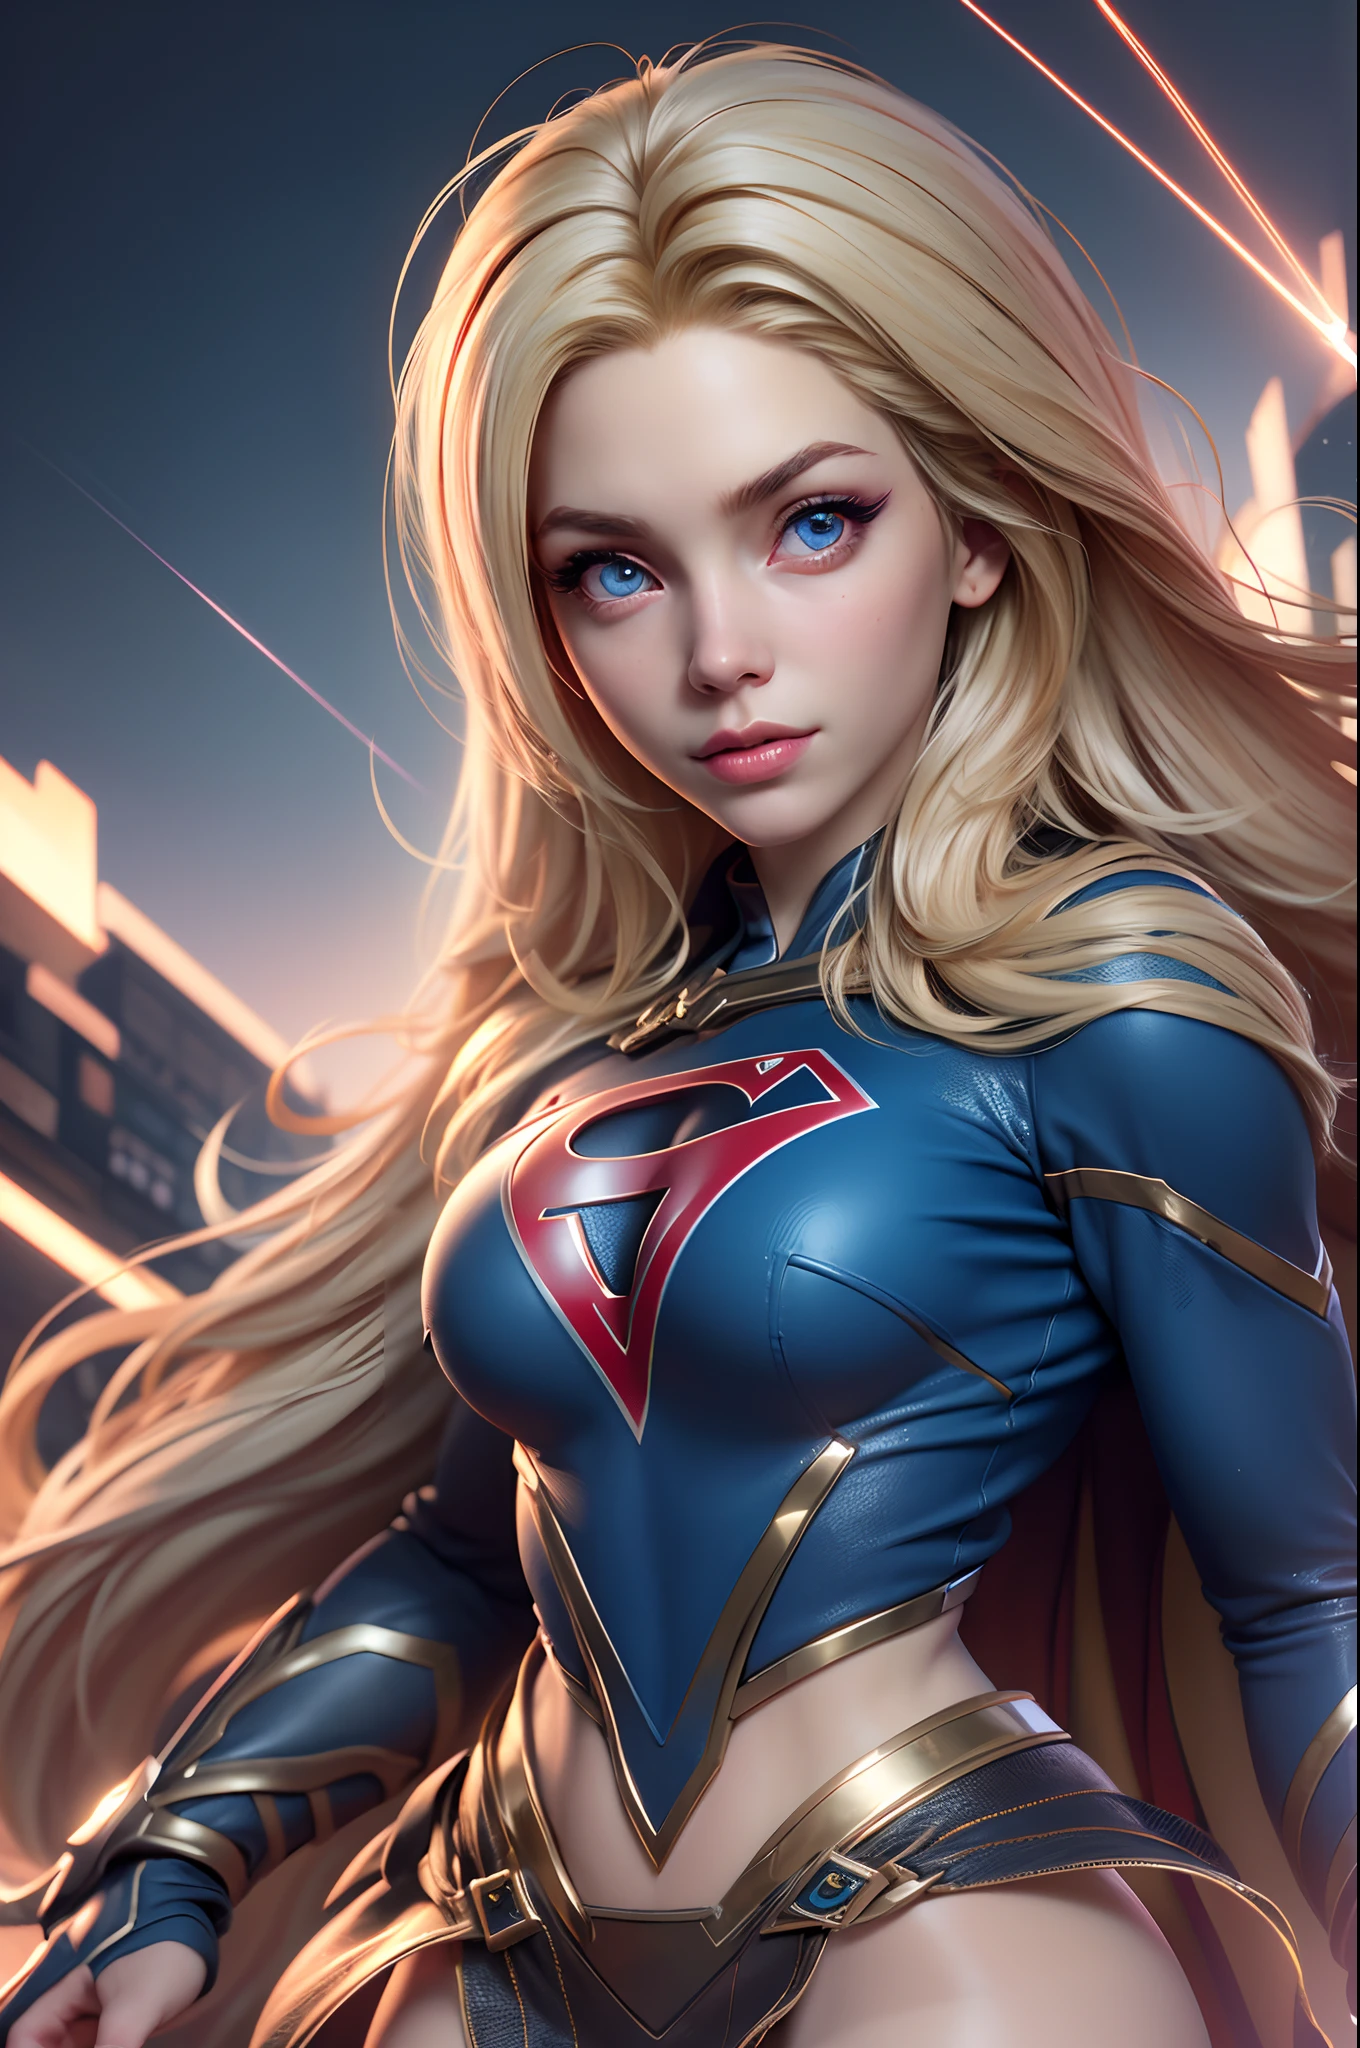 (8K, Best Quality, Photorealistic, masutepiece:1.2), super girl, Blue eyes, Blonde hair, Long hair, Cape, Superhero, Skirt, long boots, (Blonde girl:1.5), (Breast Focus:1.2), (Realistic:1.2), (Far View: 1.2), (Realism), (masutepiece:1.2), (Best Quality), (ultra-detailliert), (8K, 4K, Convoluted), (full body Esbian:1.5), (85 mm), light Particle, Lighting, (Highly detailed:1.2), (Detailed face:1.2), (gradients), SFW, Colorful, (Detailed eyes:1.2), (Detailed background), (Dynamic Angle:1.2), (Dynamic Pose:1.2), (rule of third_Composition:1.3), (Line of action:1.2), Wide Shot, Daylight, Solo.